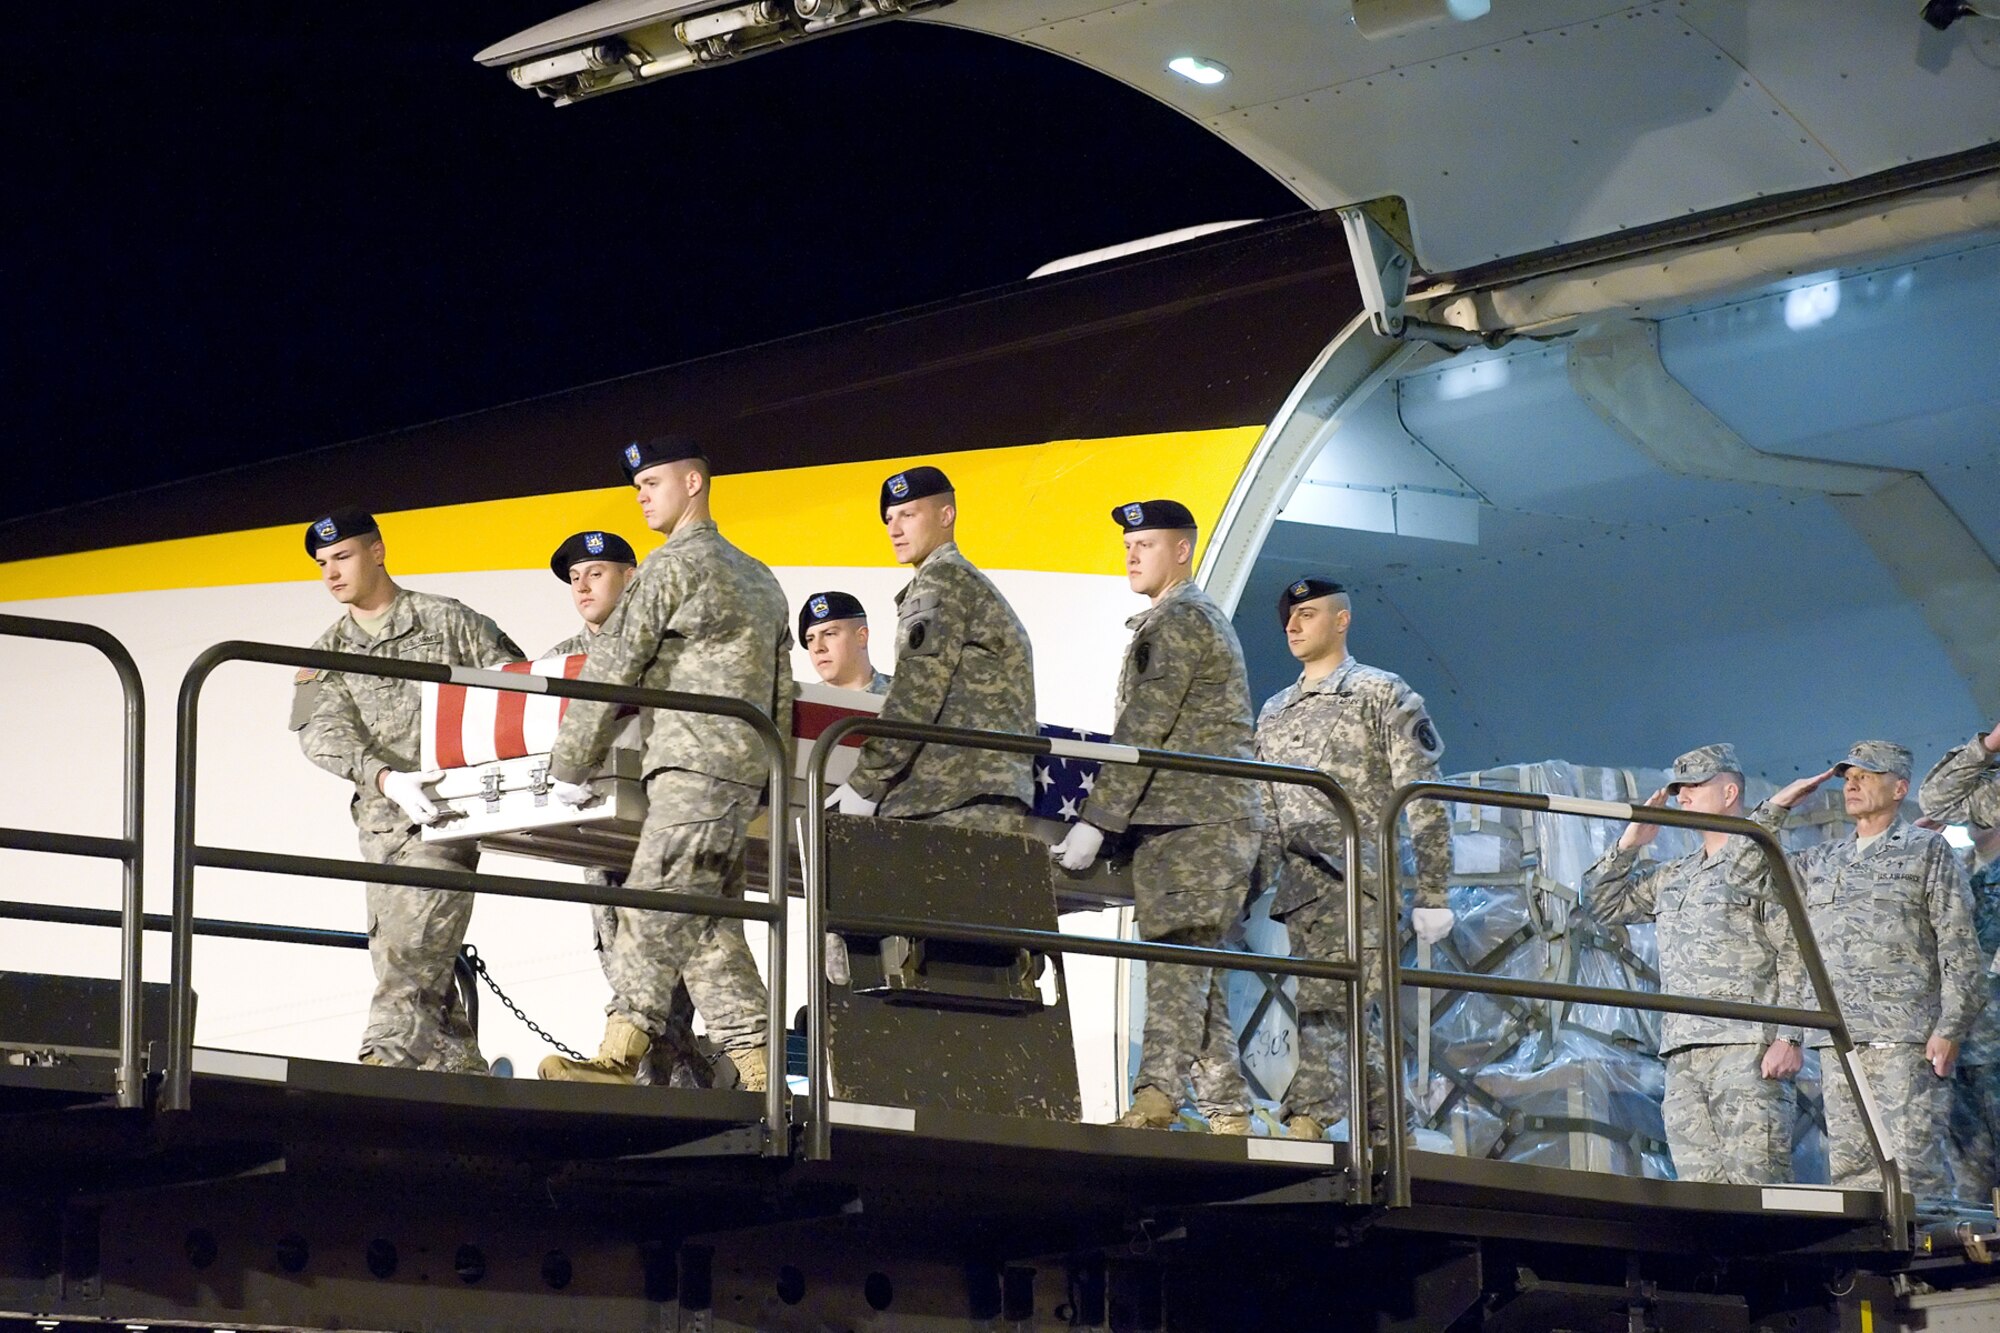 A U.S. Army carry team transfers the remains of Army 1st Lt. Robert W. Collins of Tyrone, Ga., at Dover Air Force Base, Del., on April 9, 2010. He died April 7 in Mosul, Iraq, when enemy forces attacked his vehicle with an improvised explosive device. Collins was assigned to the 1st Battalion, 64th Armor Regiment, 2nd Brigade Combat Team, Fort Stewart, Ga.  